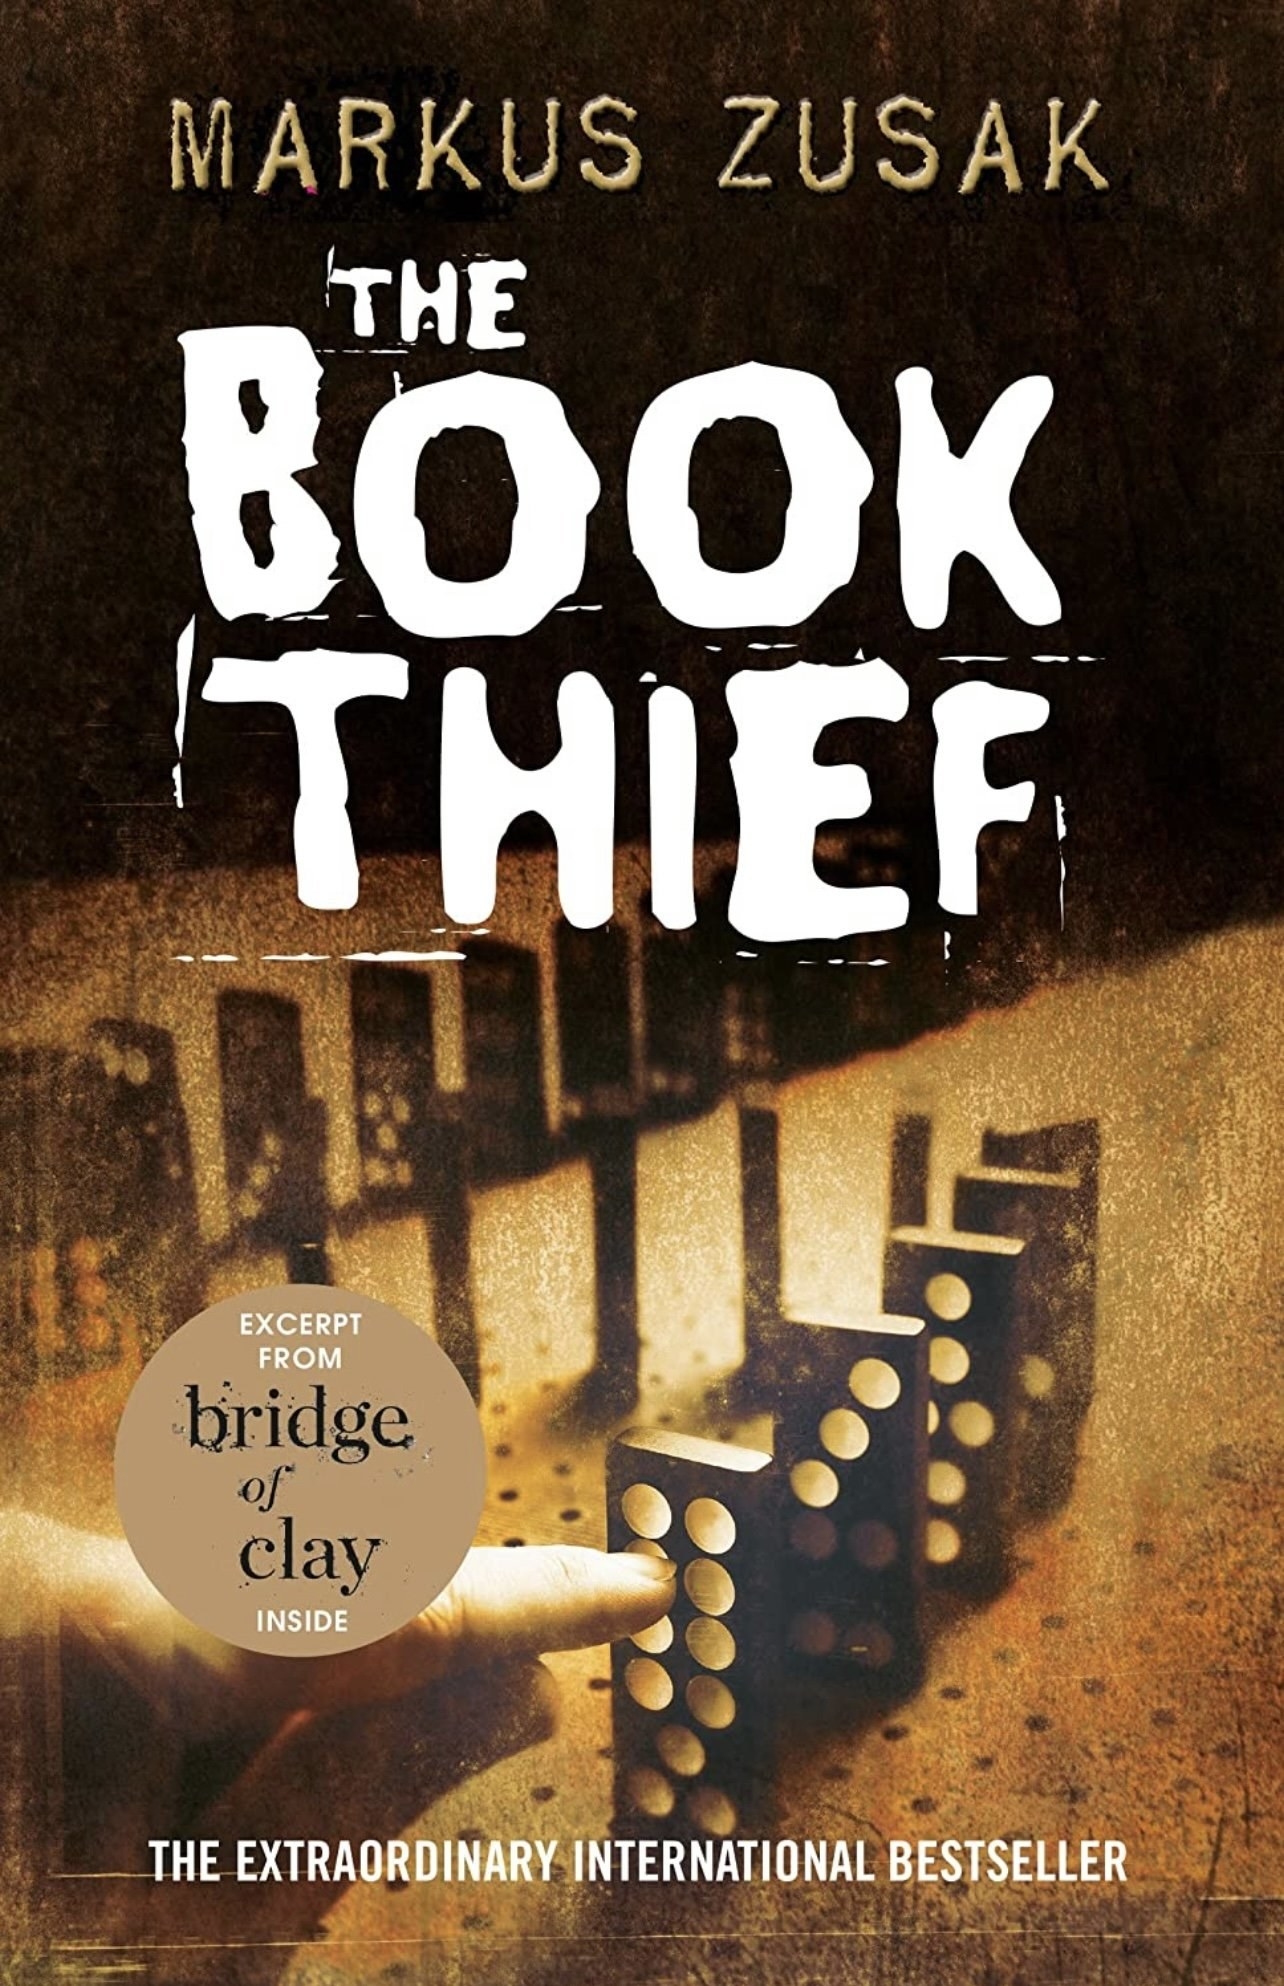 &quot;The Book Thief&quot; by Marcus Zusak.